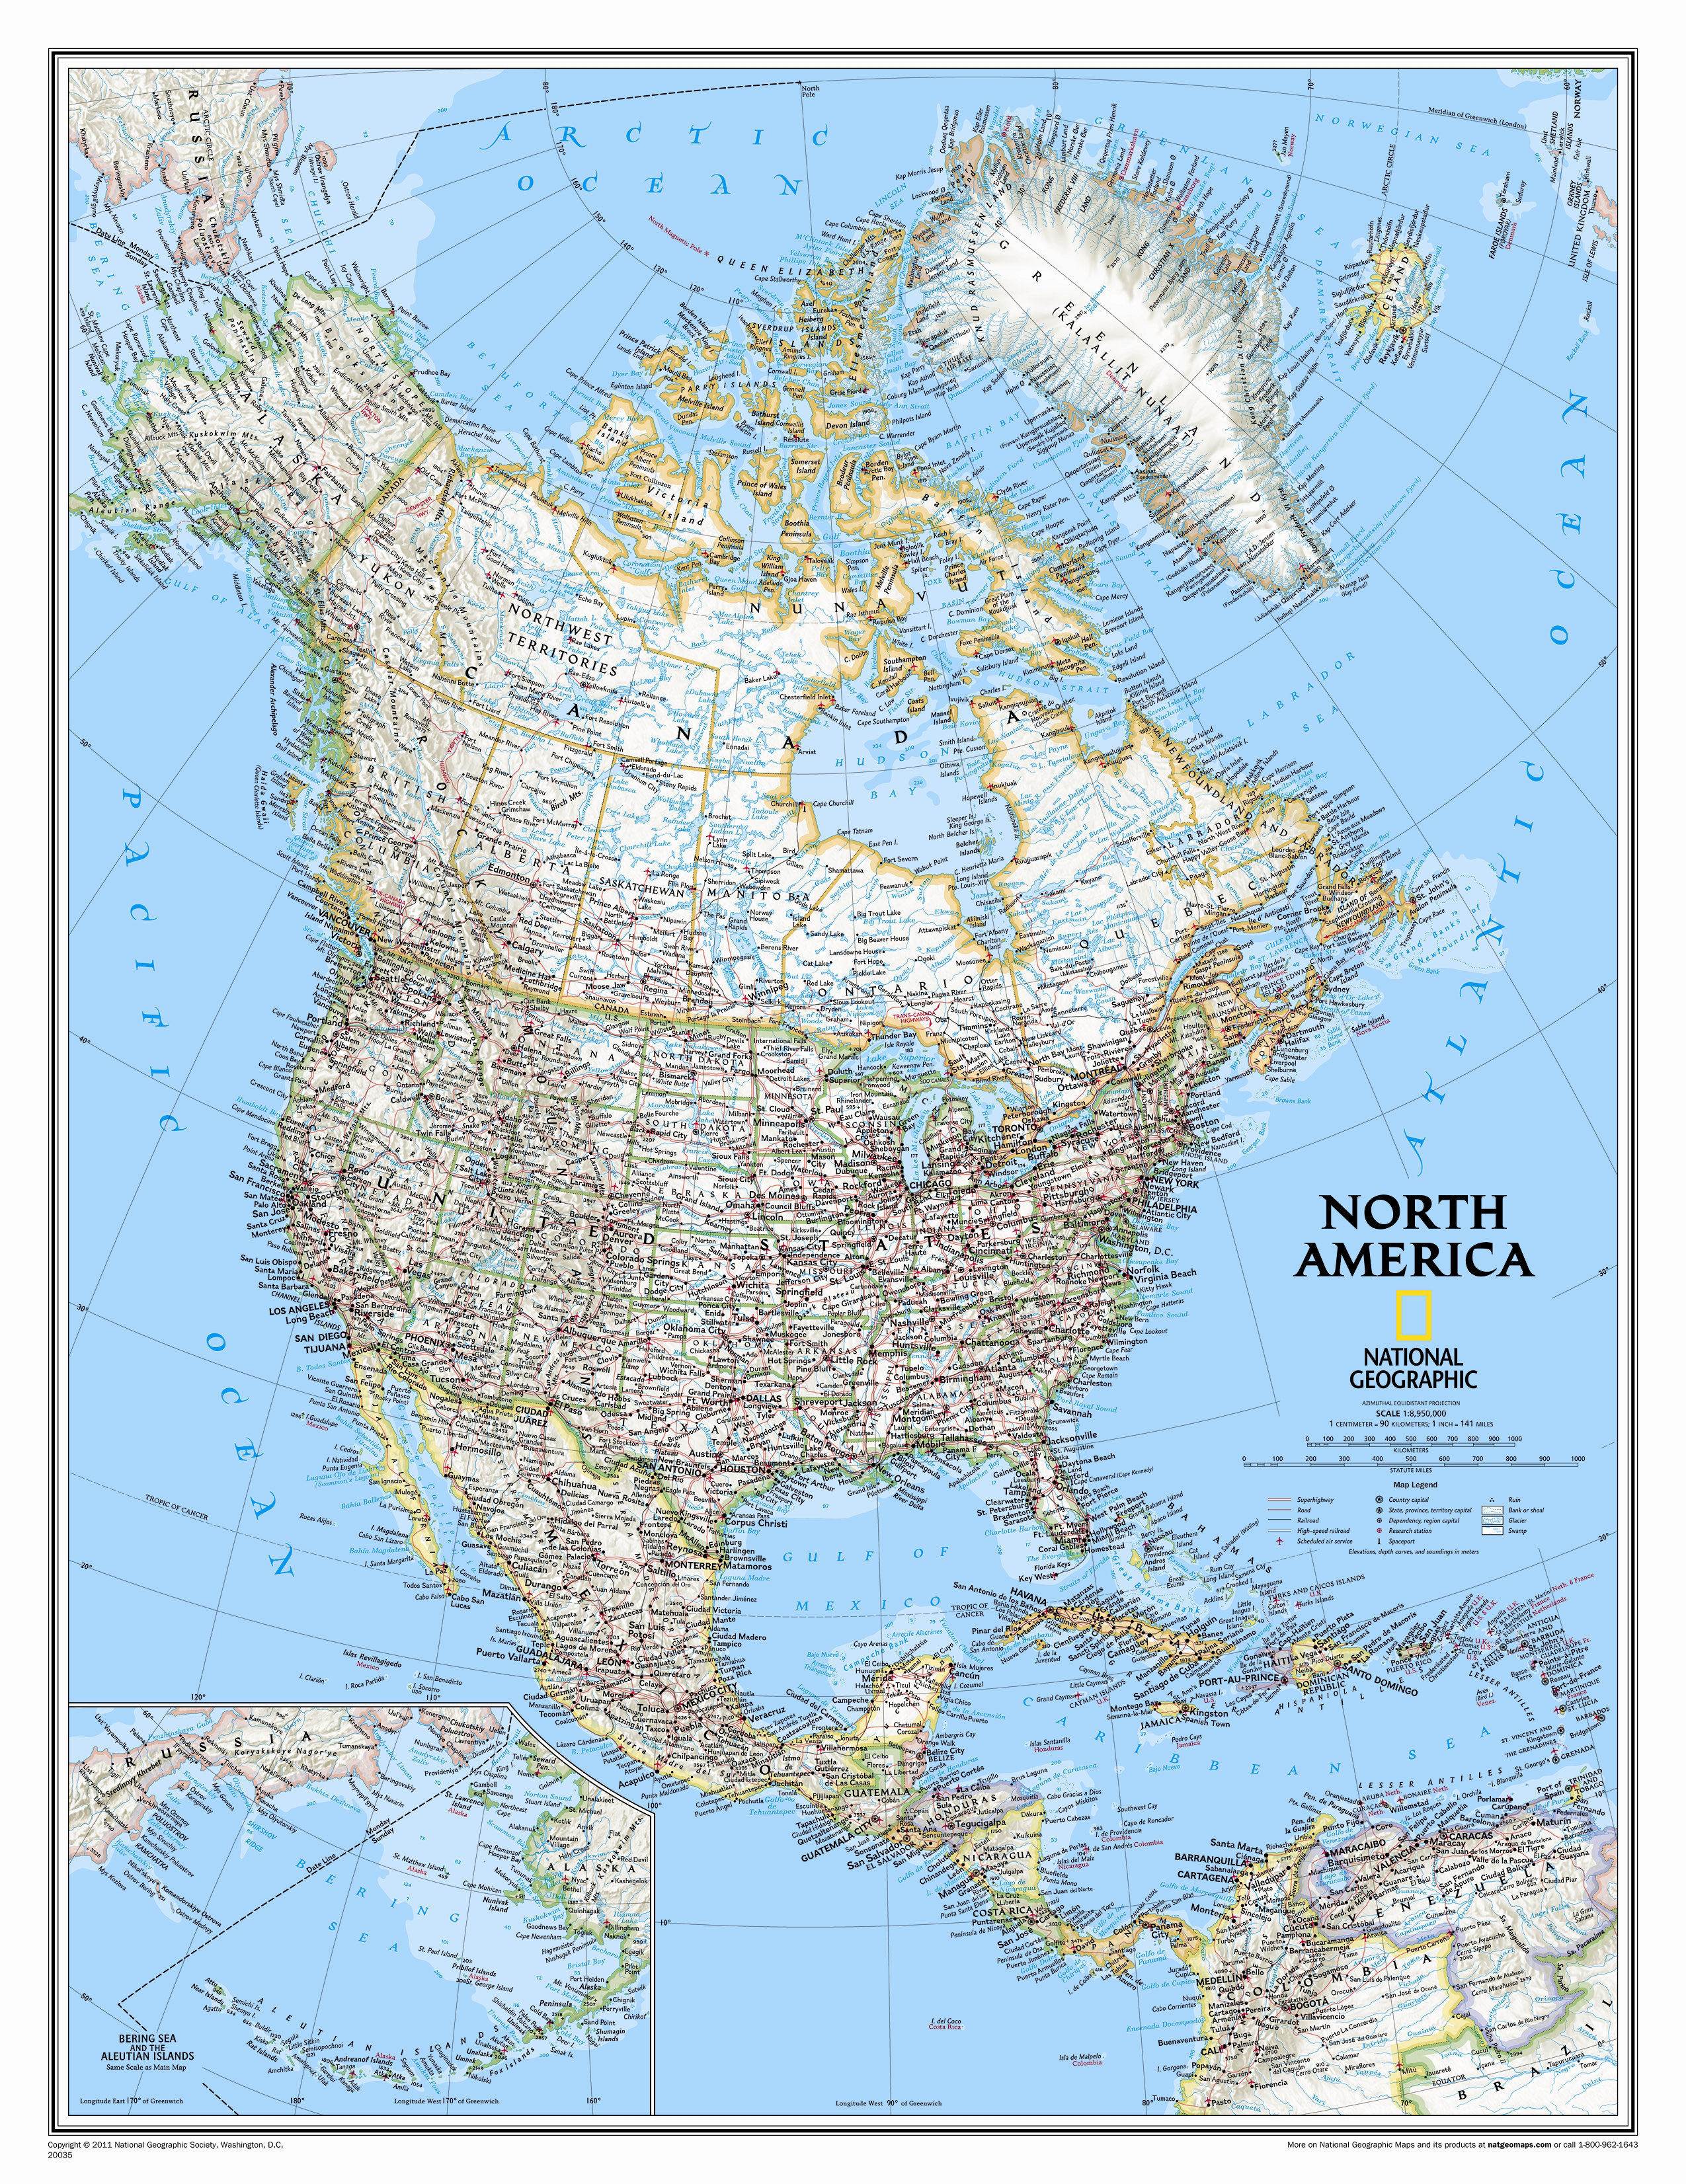 National Geographic Maps North America Classic Wall Map Wayfair